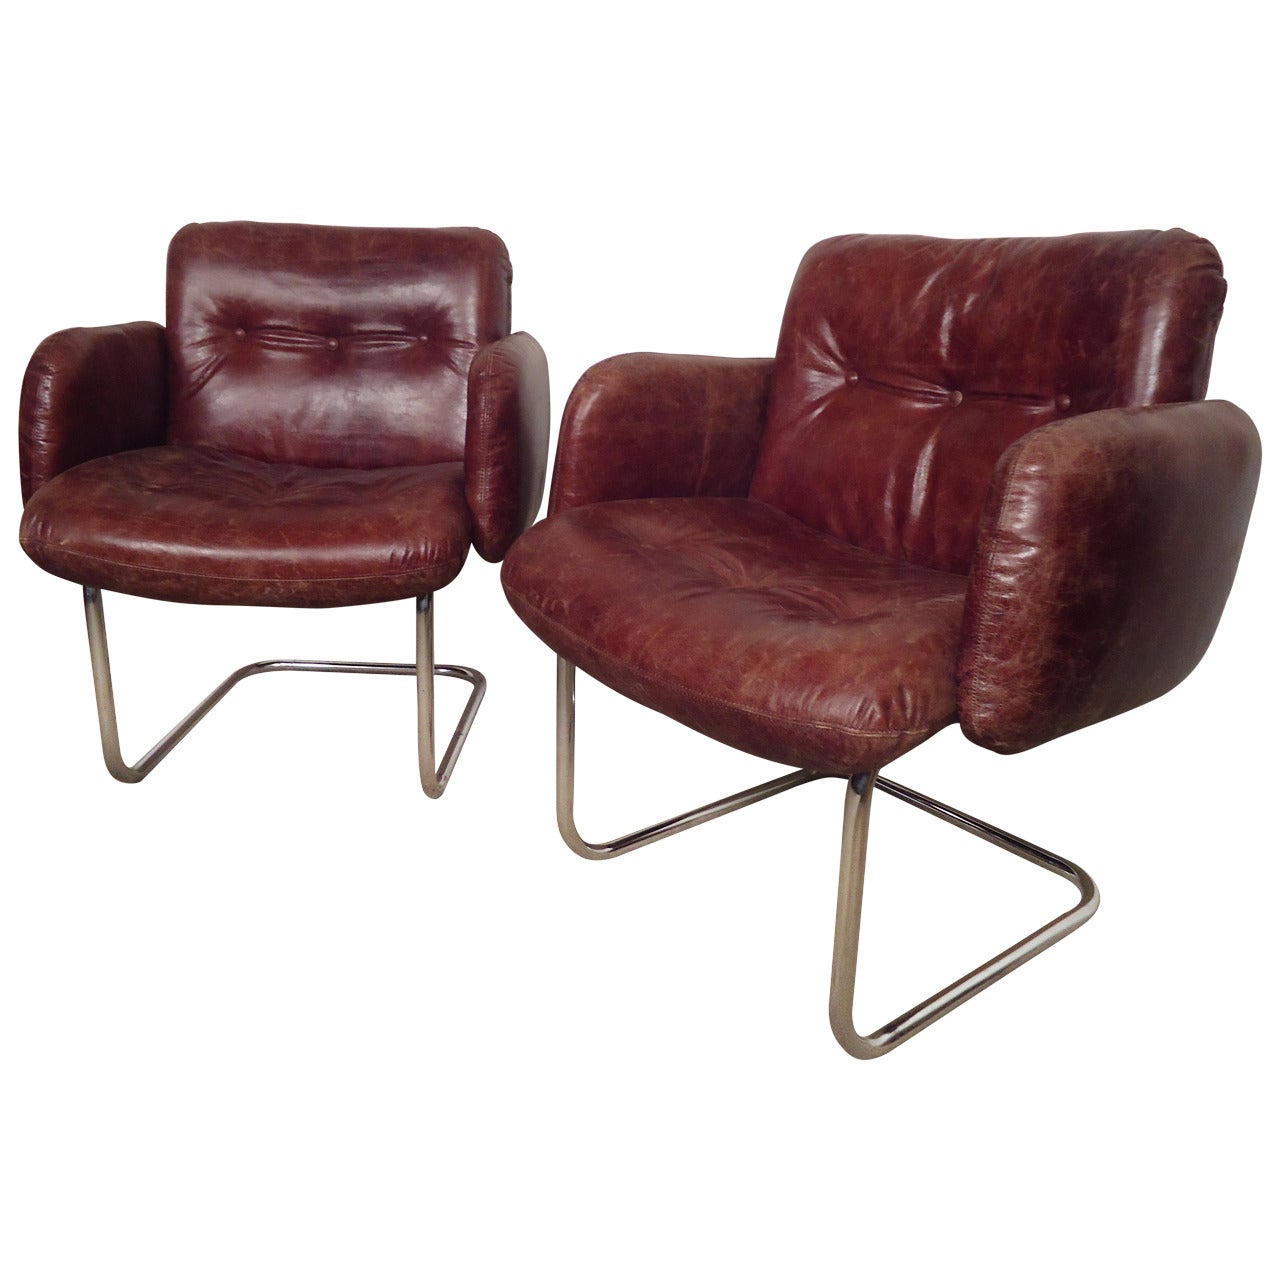 Pair of Mid-Century Tufted Leather Chairs by Harvey Probber